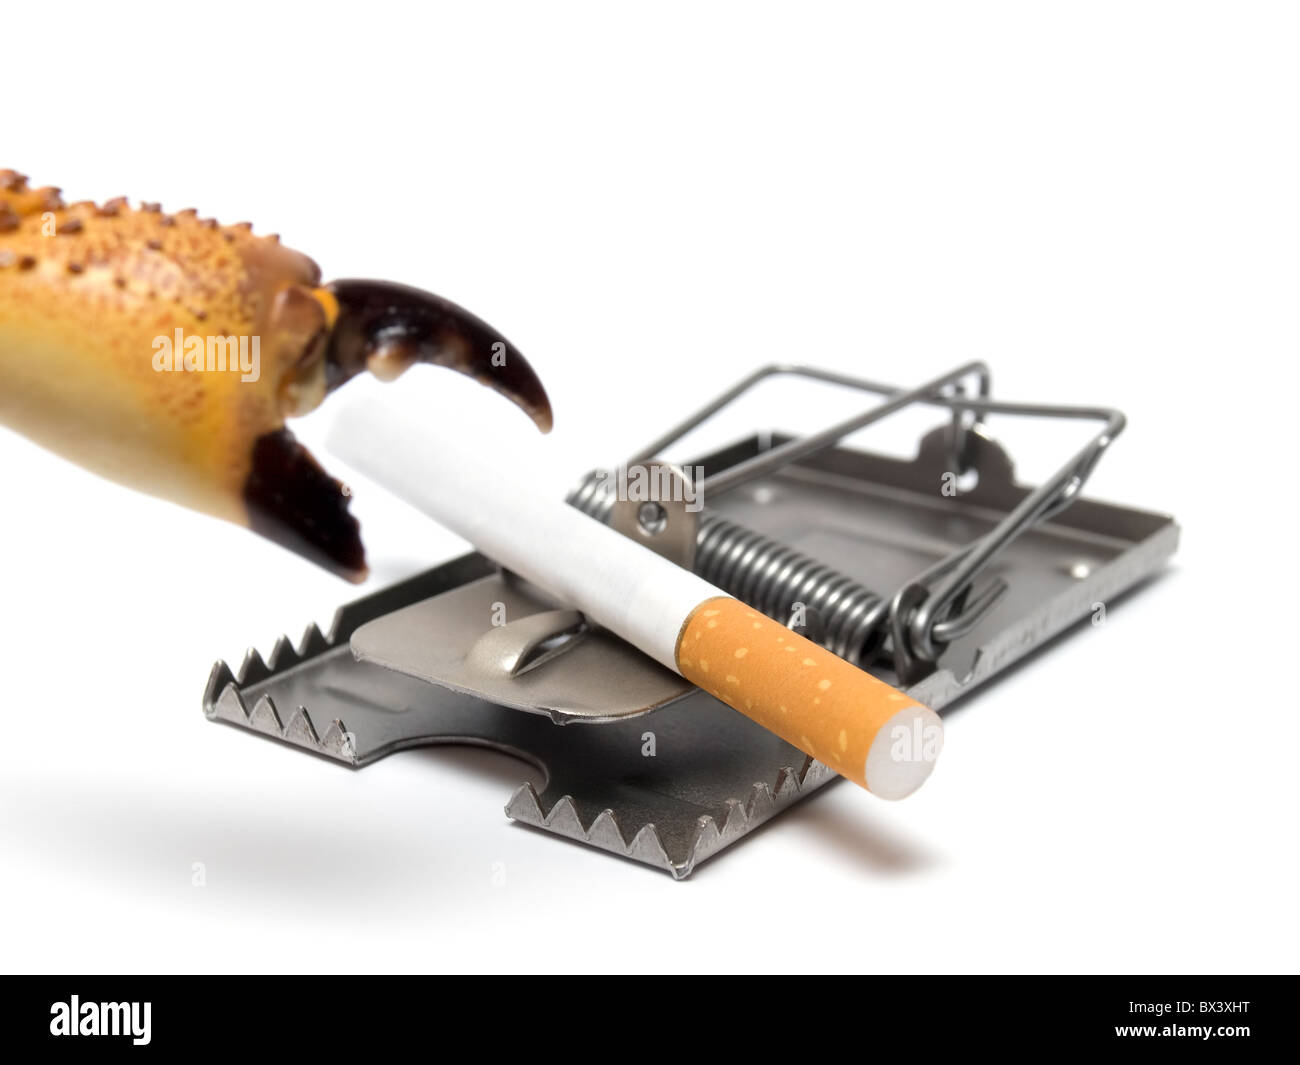 This concept represents fight against smoking and lung cancer prevention... Stock Photo